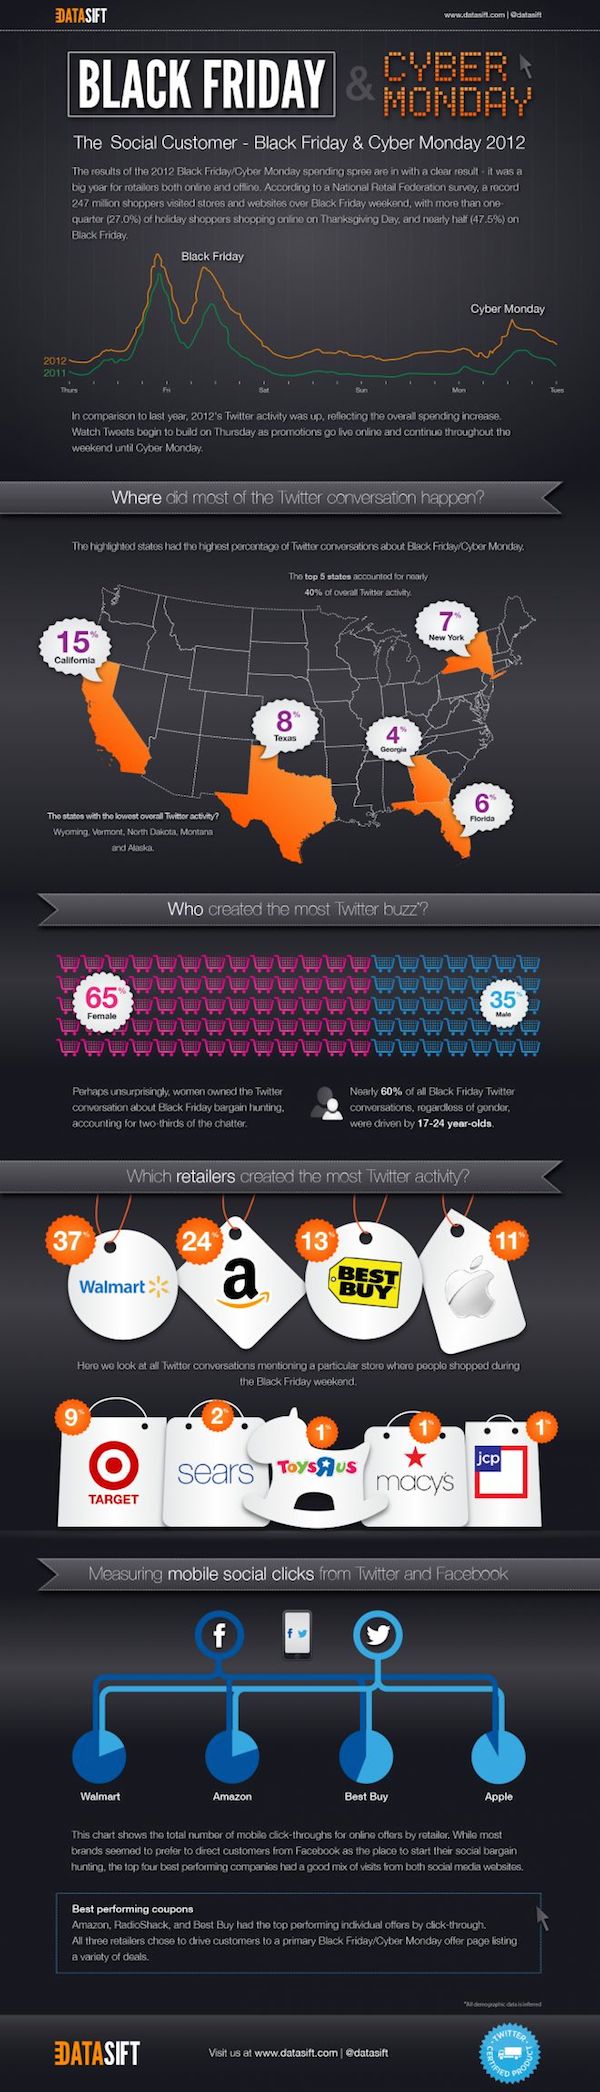 20 Black Friday And Cyber Monday Infographics image 18.jpg